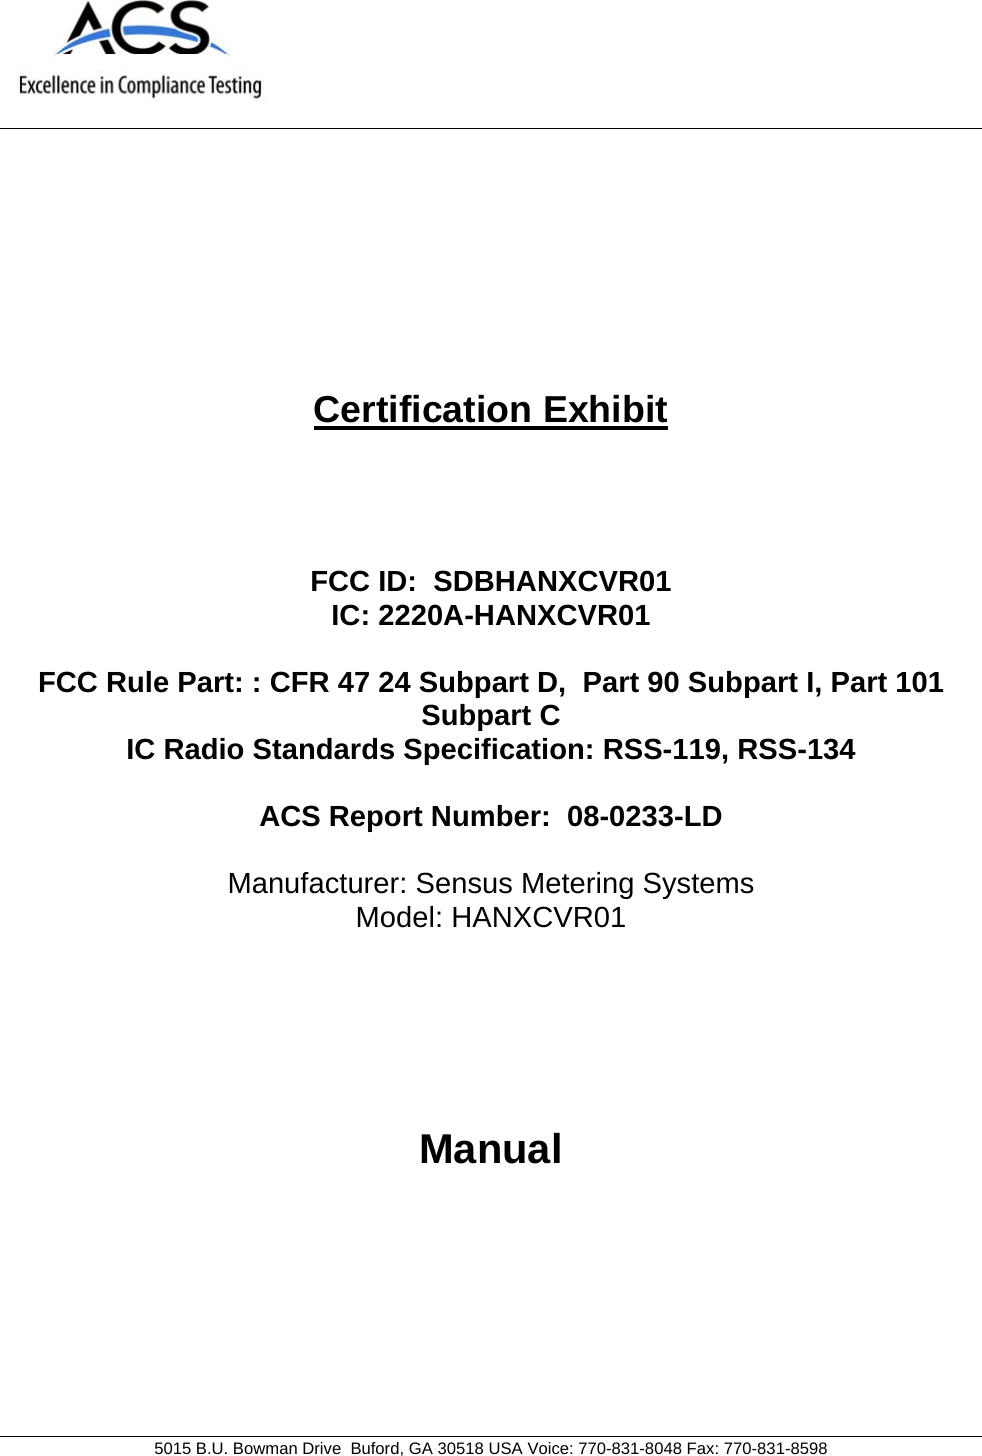     5015 B.U. Bowman Drive  Buford, GA 30518 USA Voice: 770-831-8048 Fax: 770-831-8598   Certification Exhibit     FCC ID:  SDBHANXCVR01 IC: 2220A-HANXCVR01  FCC Rule Part: : CFR 47 24 Subpart D,  Part 90 Subpart I, Part 101 Subpart C IC Radio Standards Specification: RSS-119, RSS-134  ACS Report Number:  08-0233-LD   Manufacturer: Sensus Metering Systems Model: HANXCVR01     Manual 